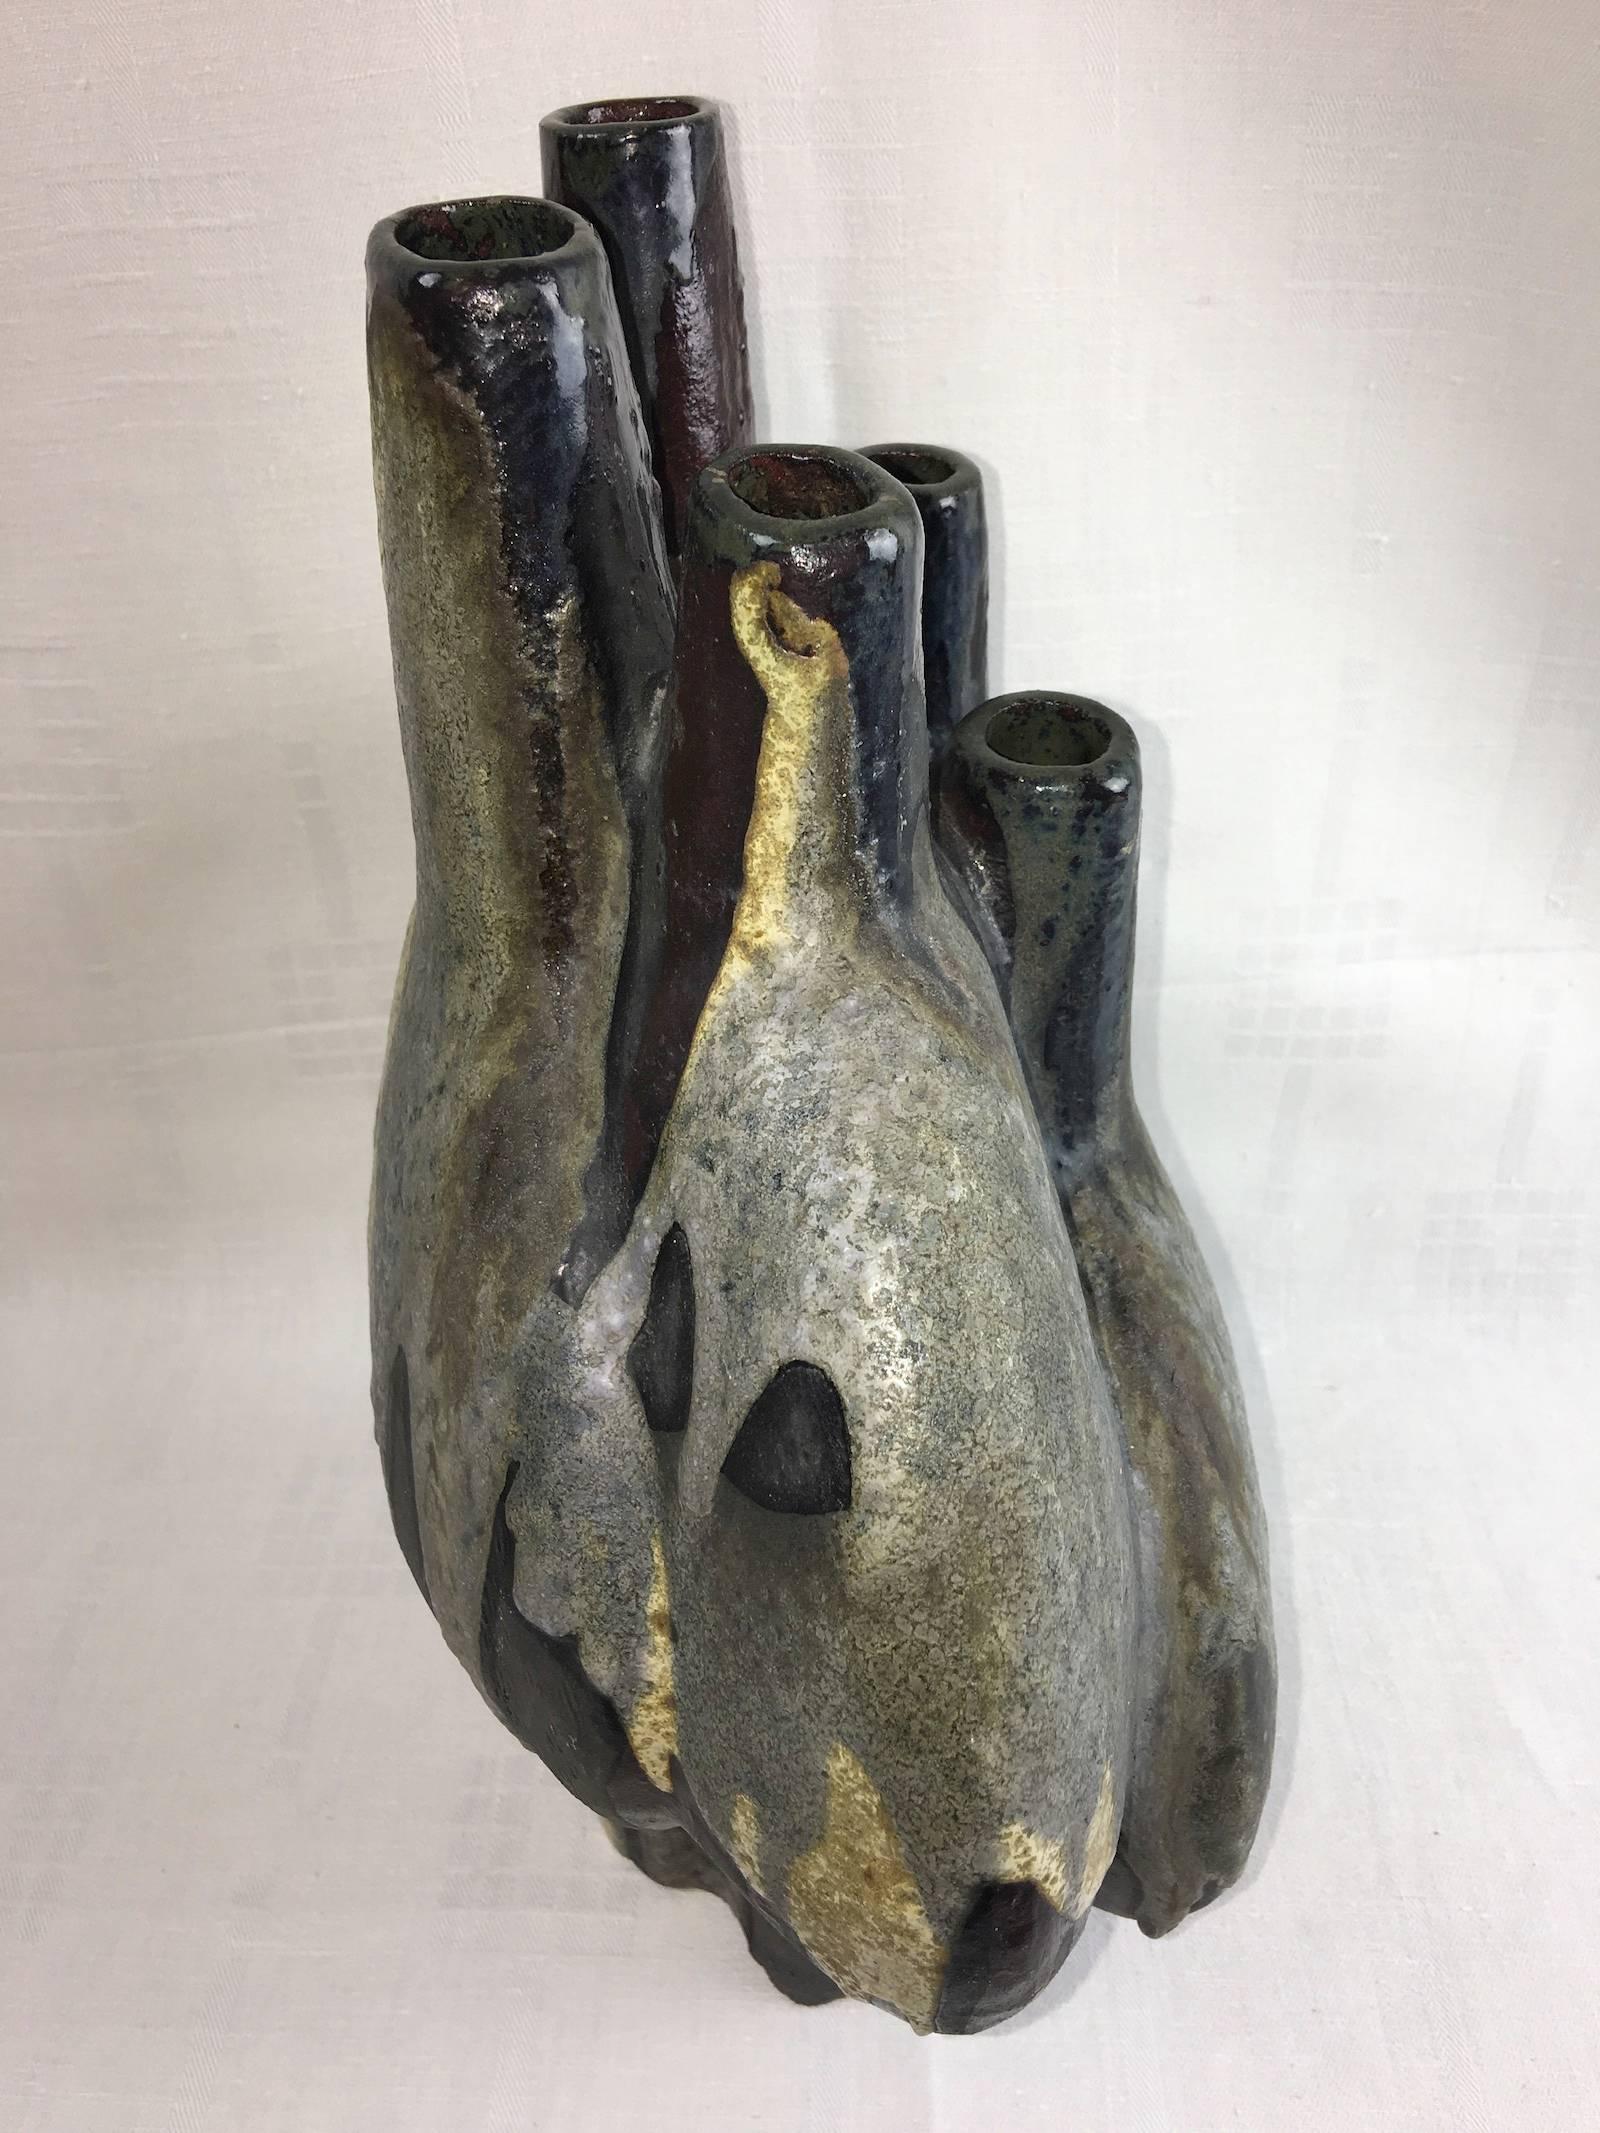 Huge sculptural studio ceramic vase with a lava surface made in the 1960s in Germany. Made by the famous Artist Helmut Friedrich Schäffenacker Ulm, Marked on the base.